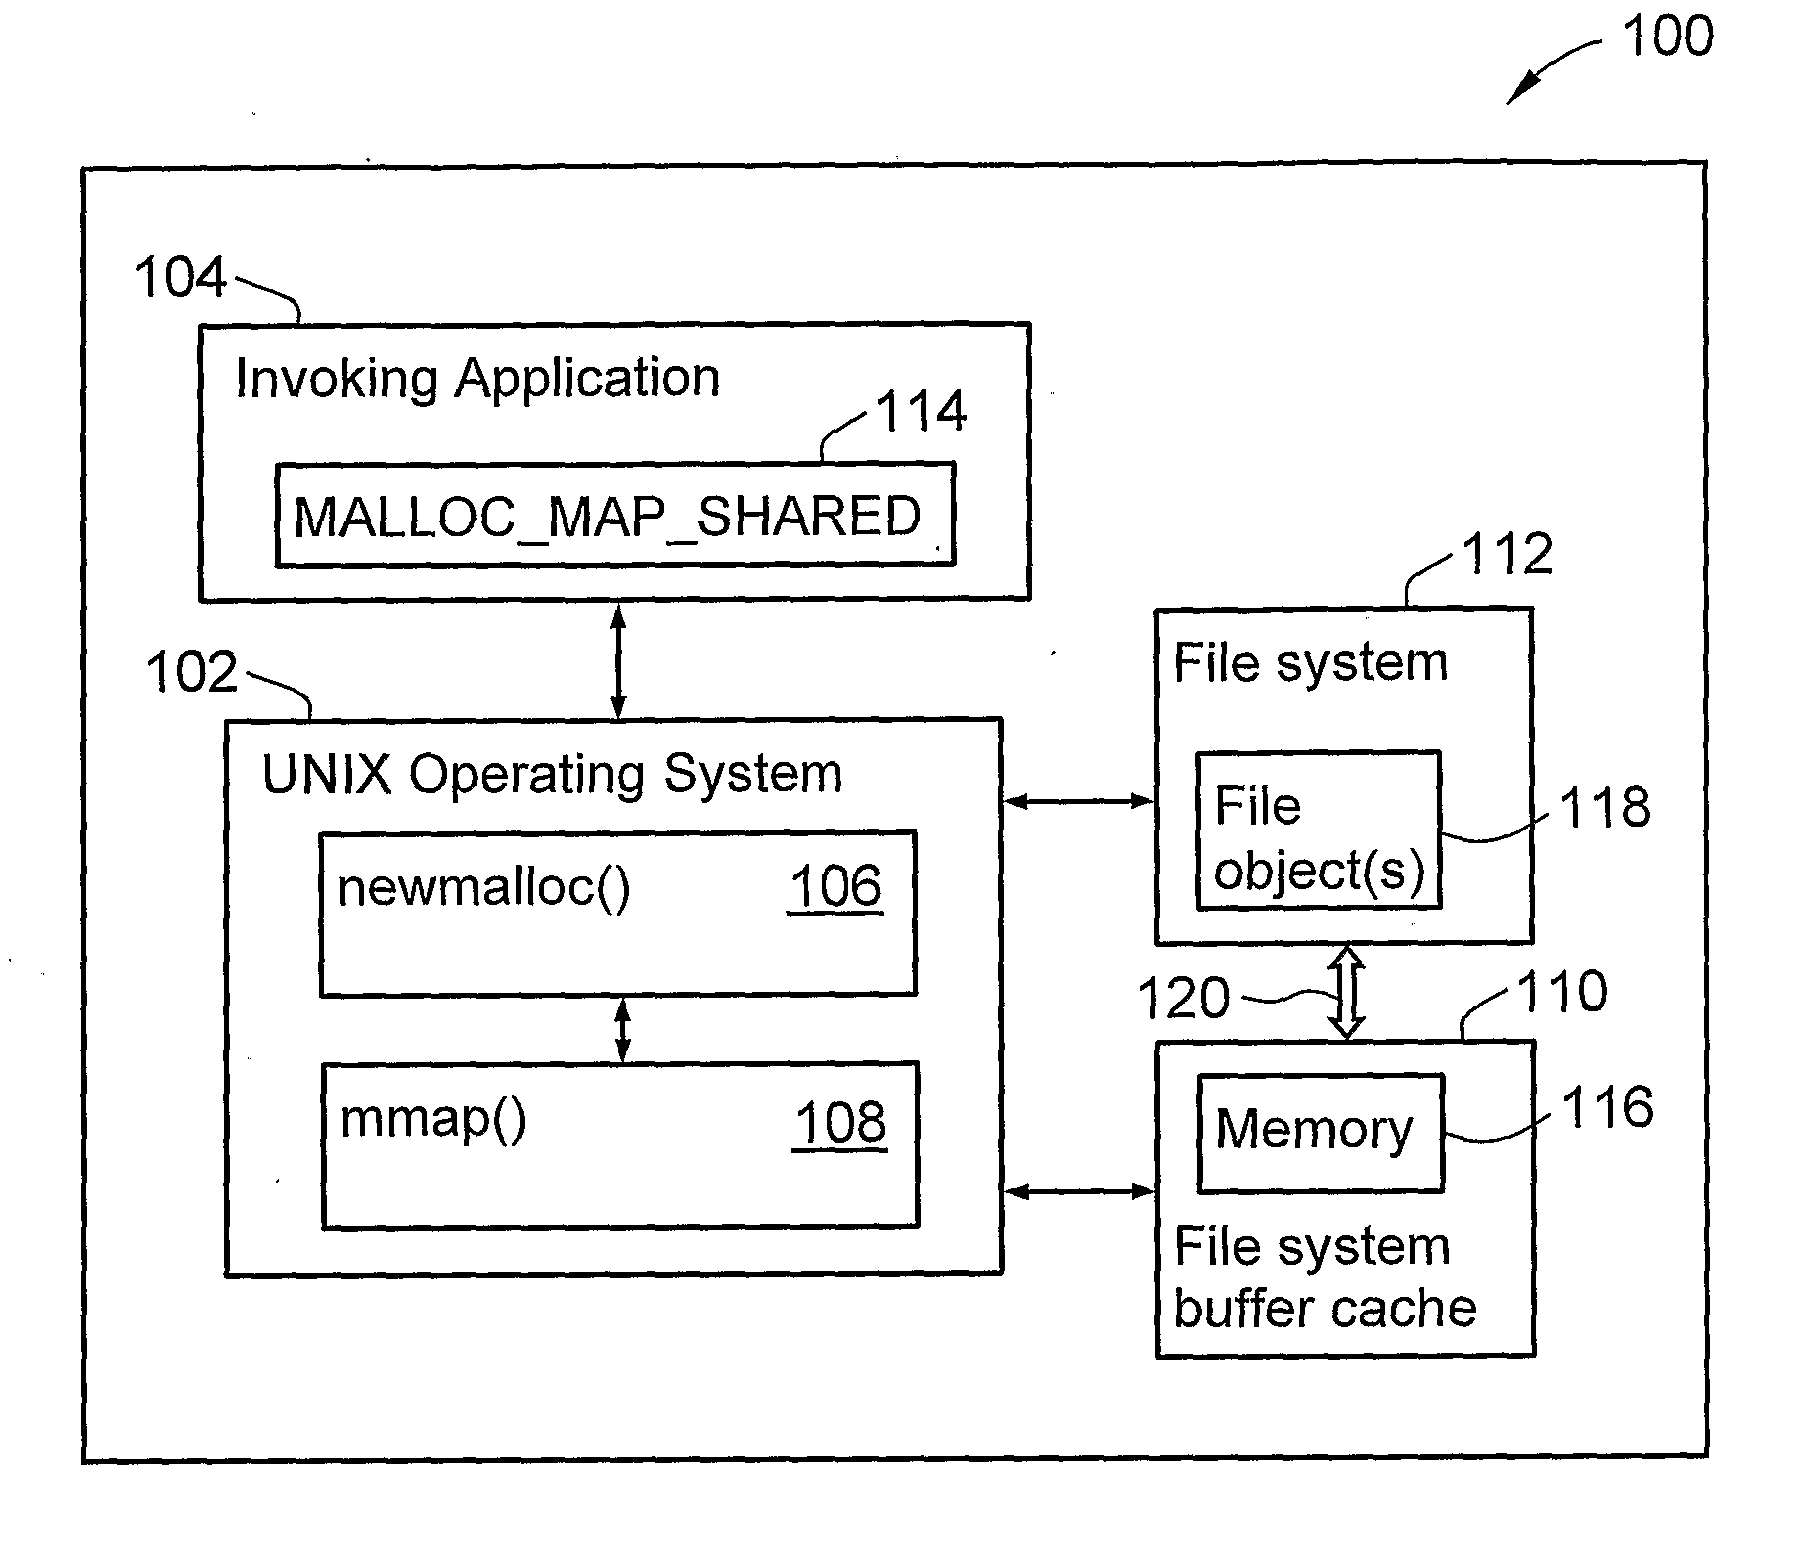 Method and System for Allocating Memory in a Computing Environment